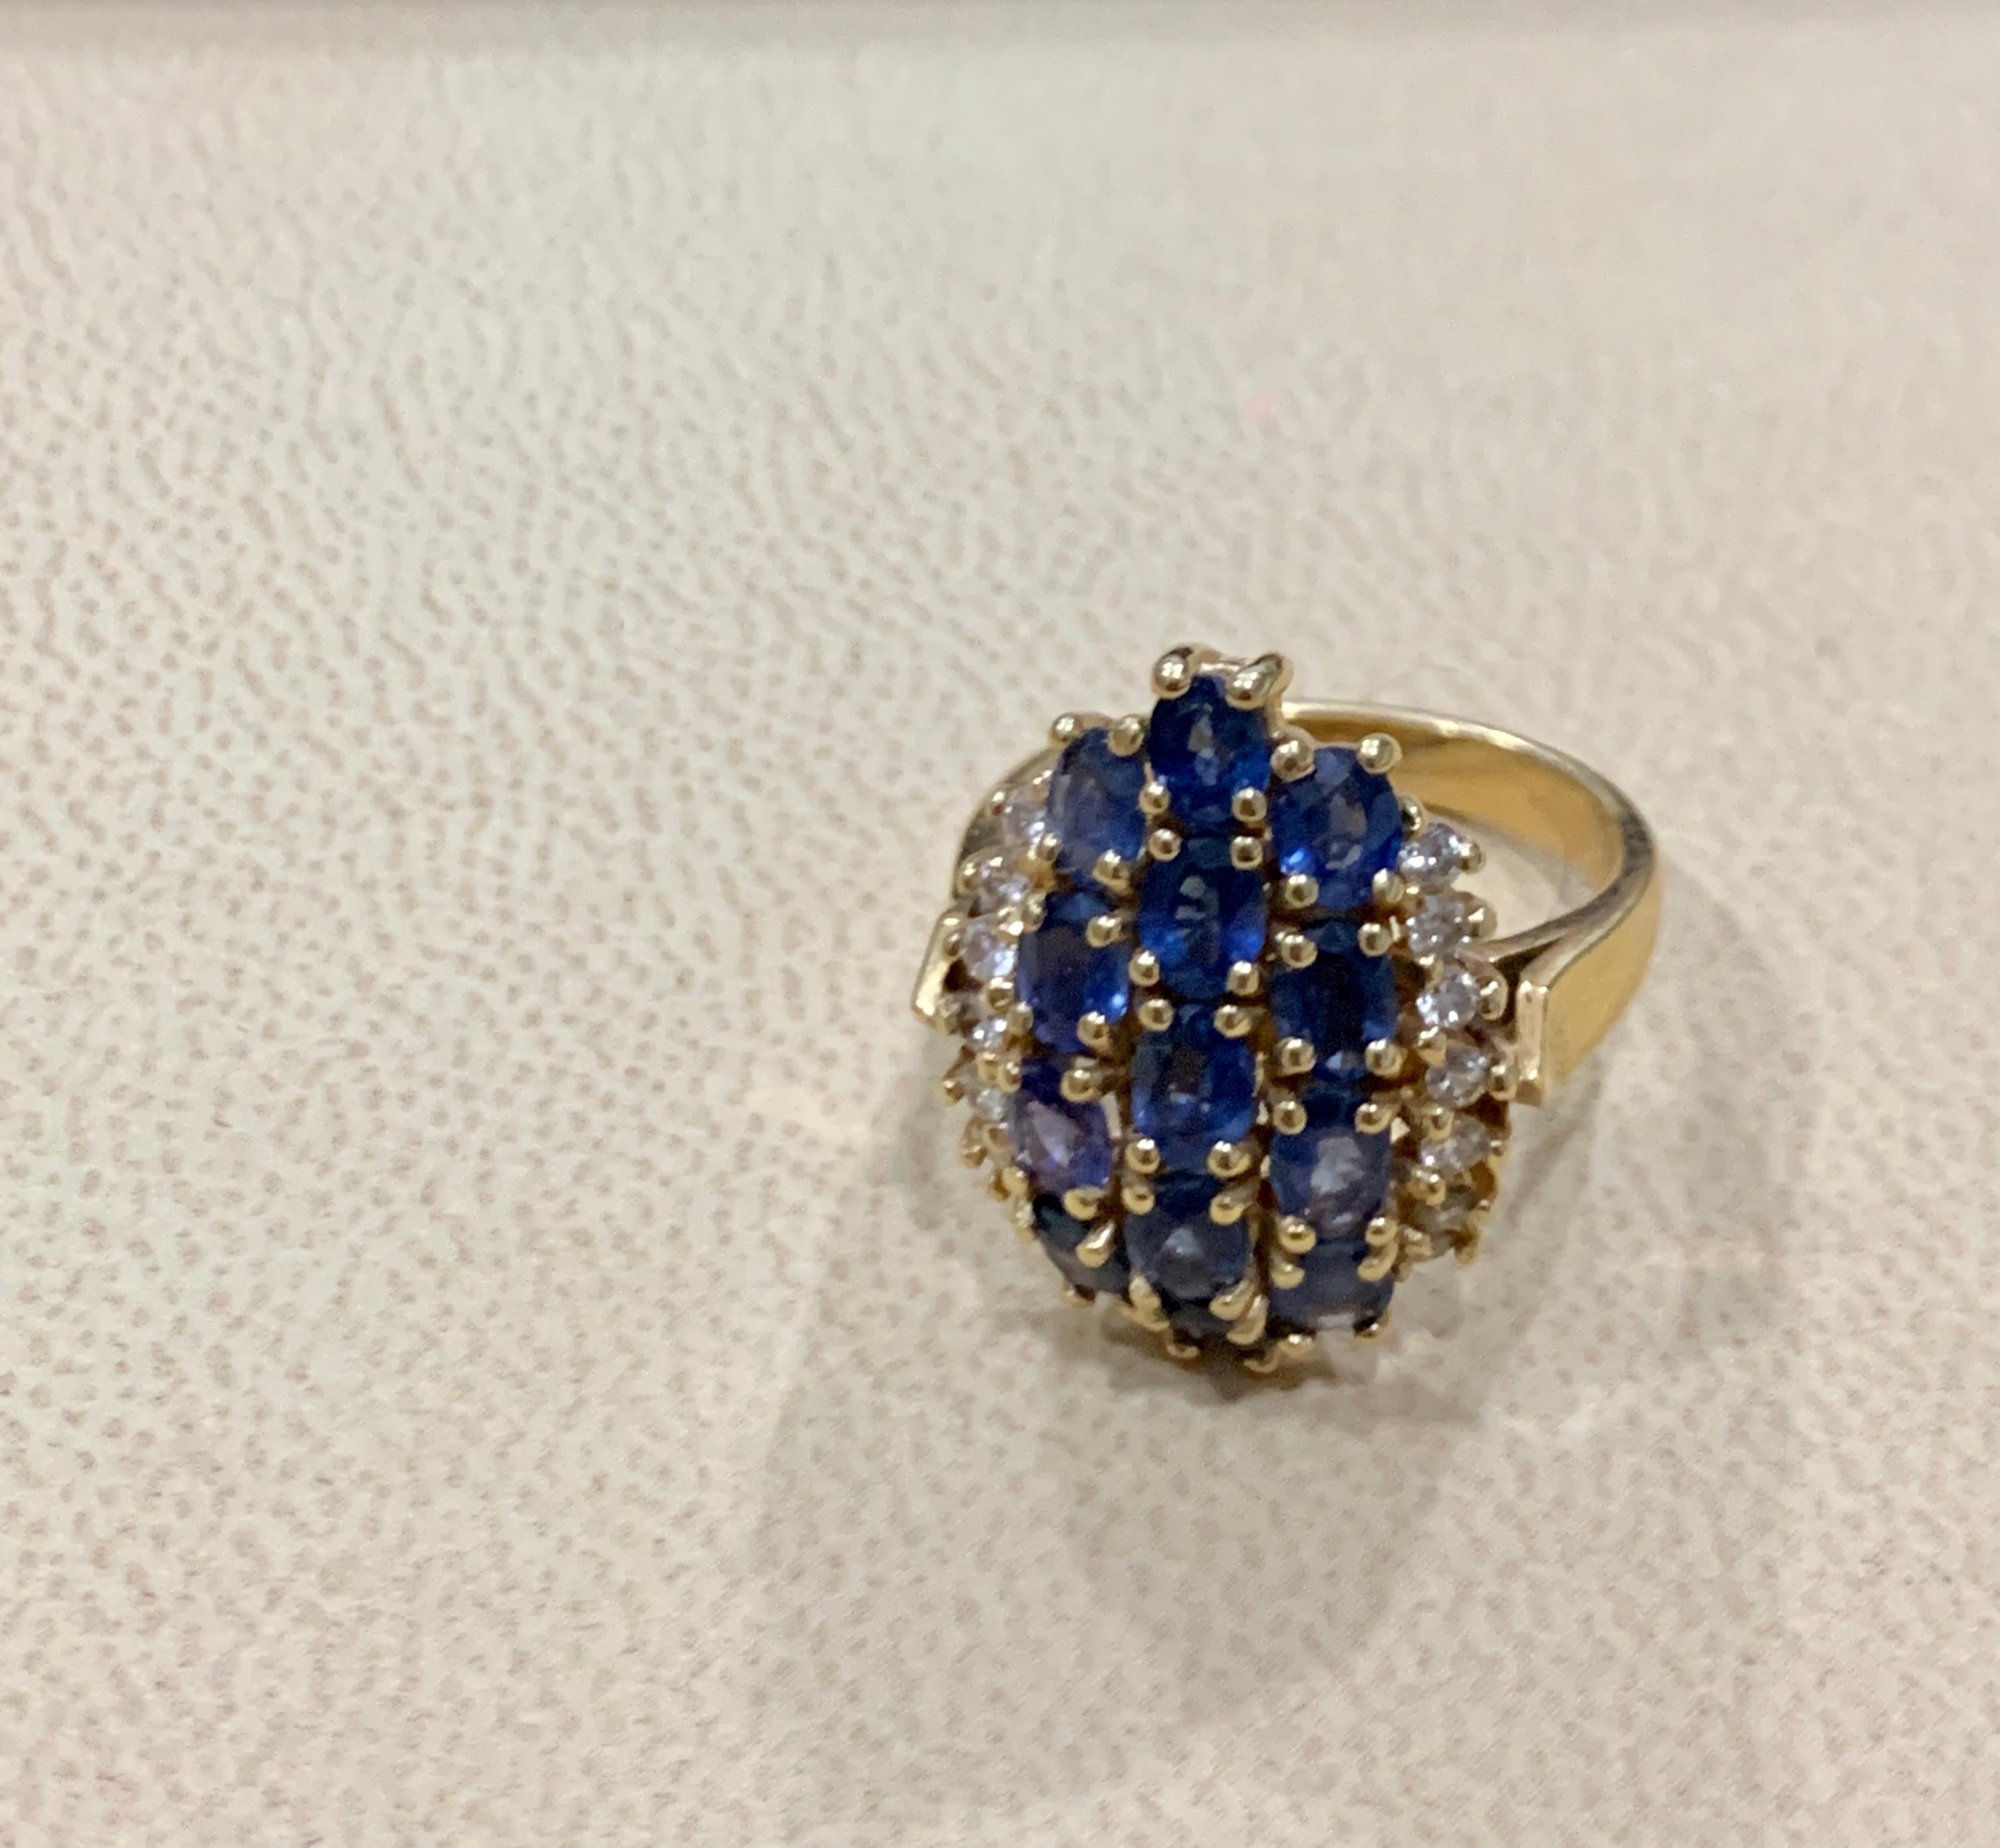 2 Carat Oval Blue Sapphire and Diamond Cocktail Ring in 14 Karat Gold Estate For Sale 1